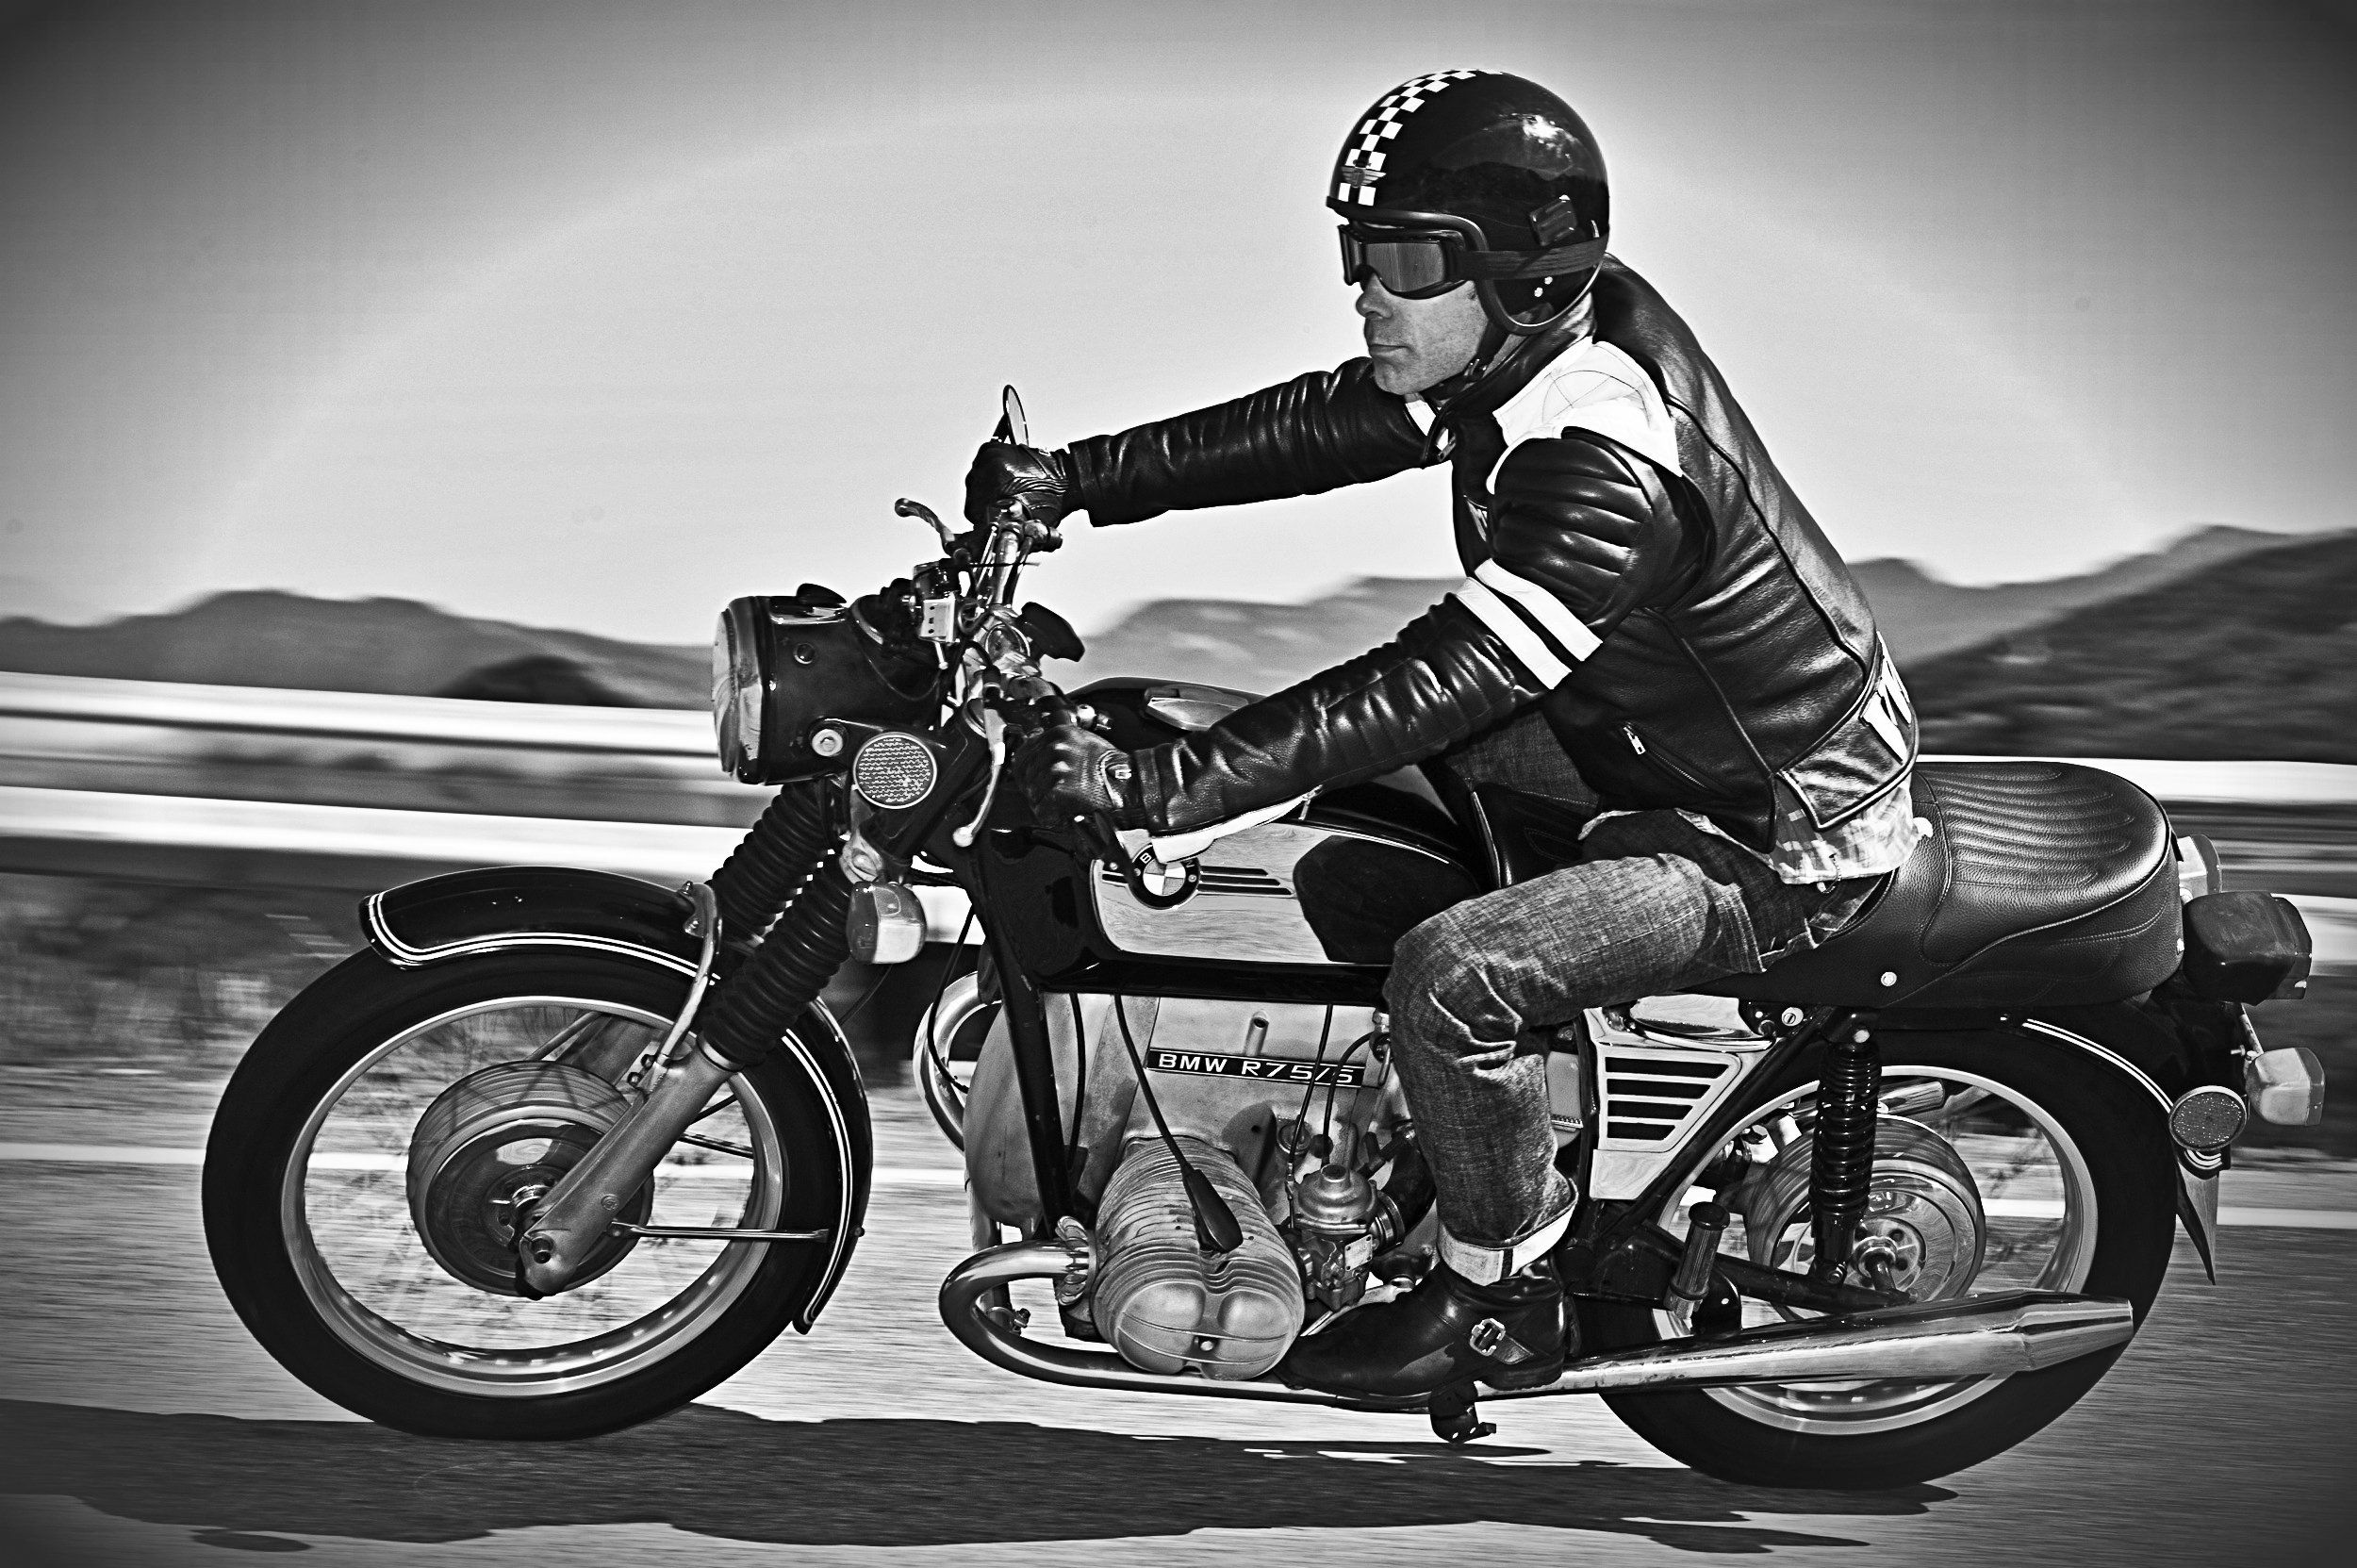 Vintage Motorcycle Wallpaper High Quality Vehicles